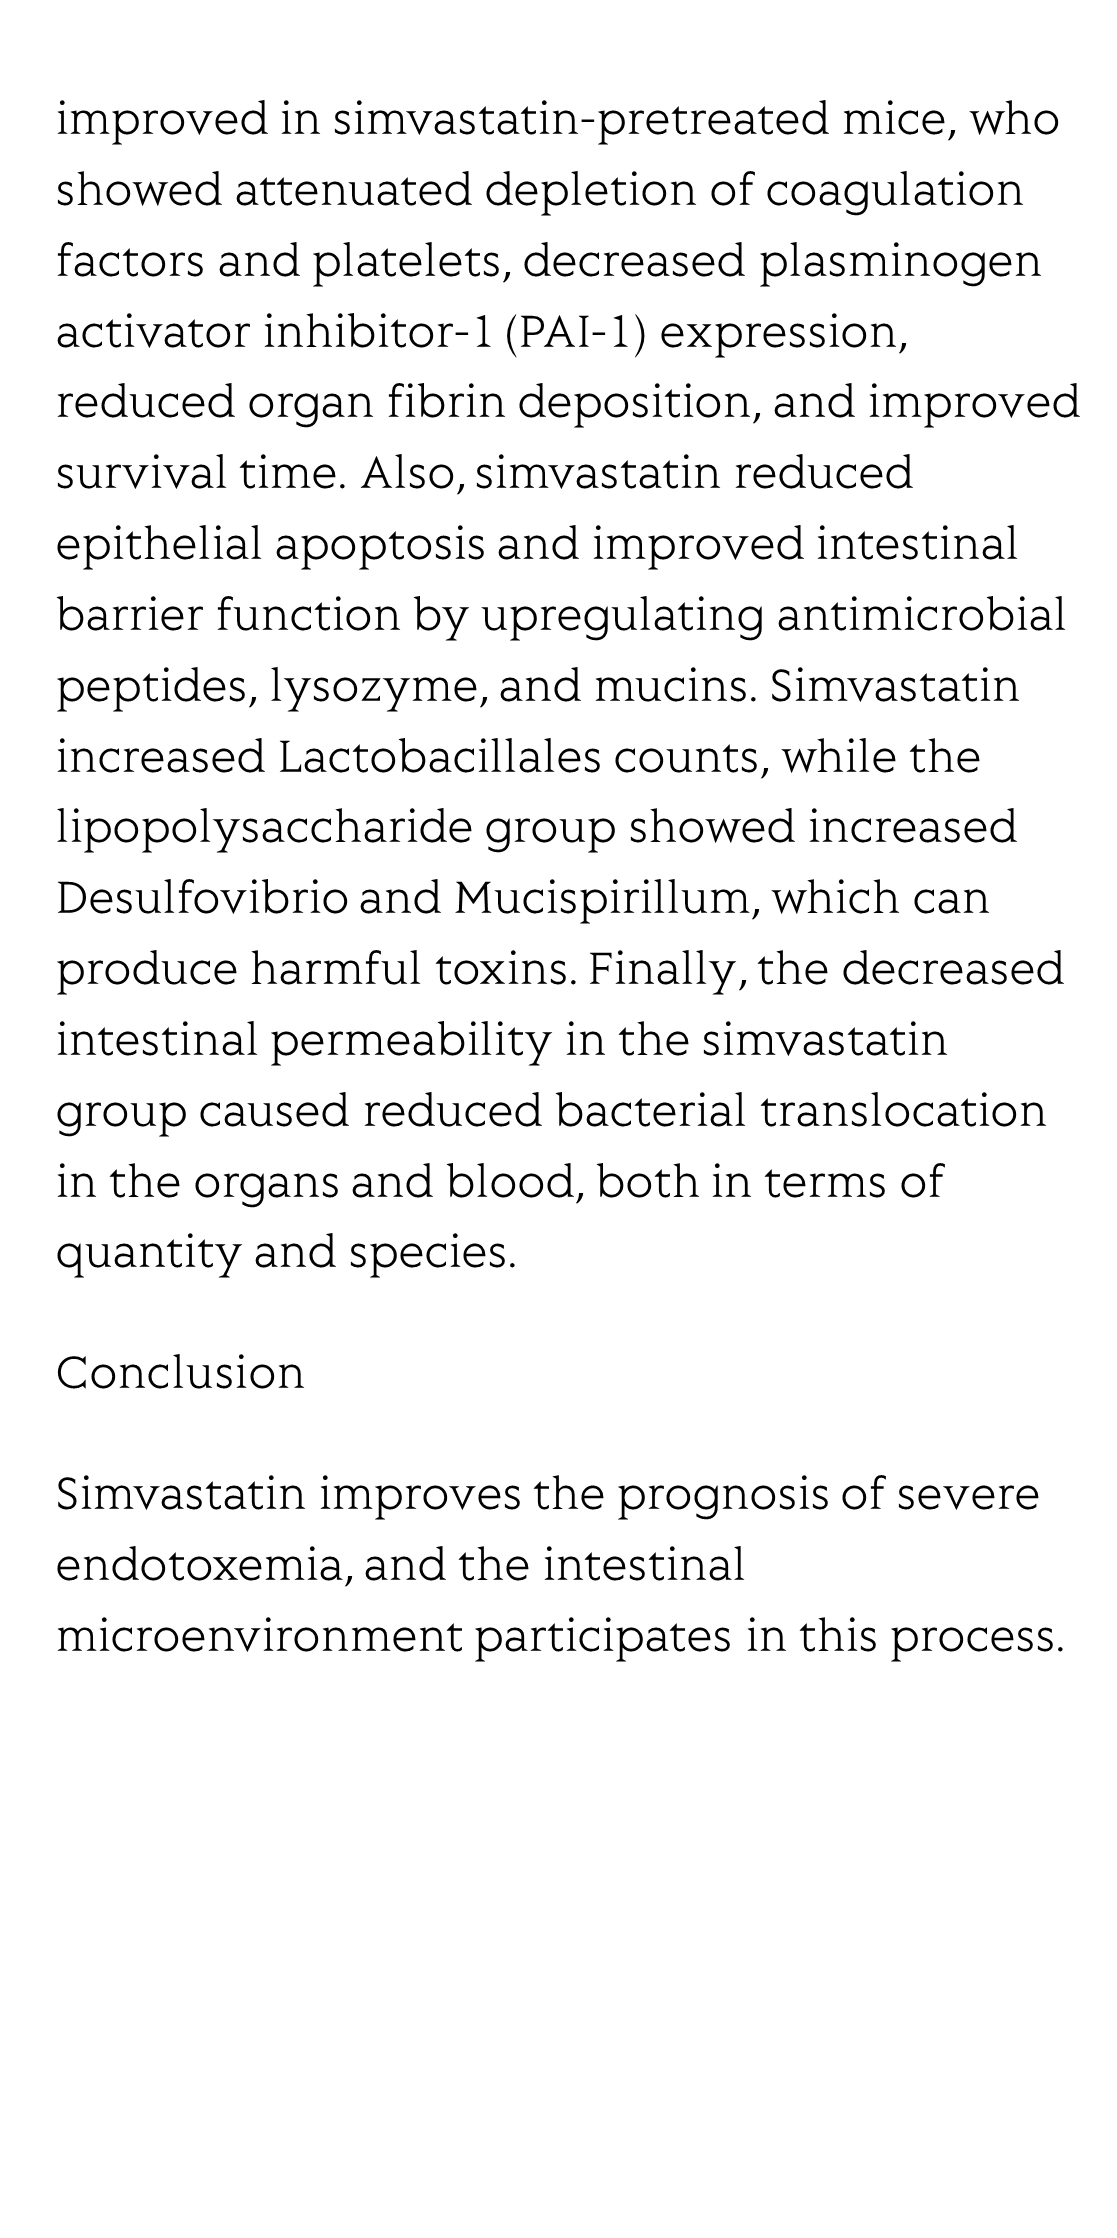 Simvastatin Improves Outcomes of Endotoxin-induced Coagulopathy by Regulating Intestinal Microenvironment_3